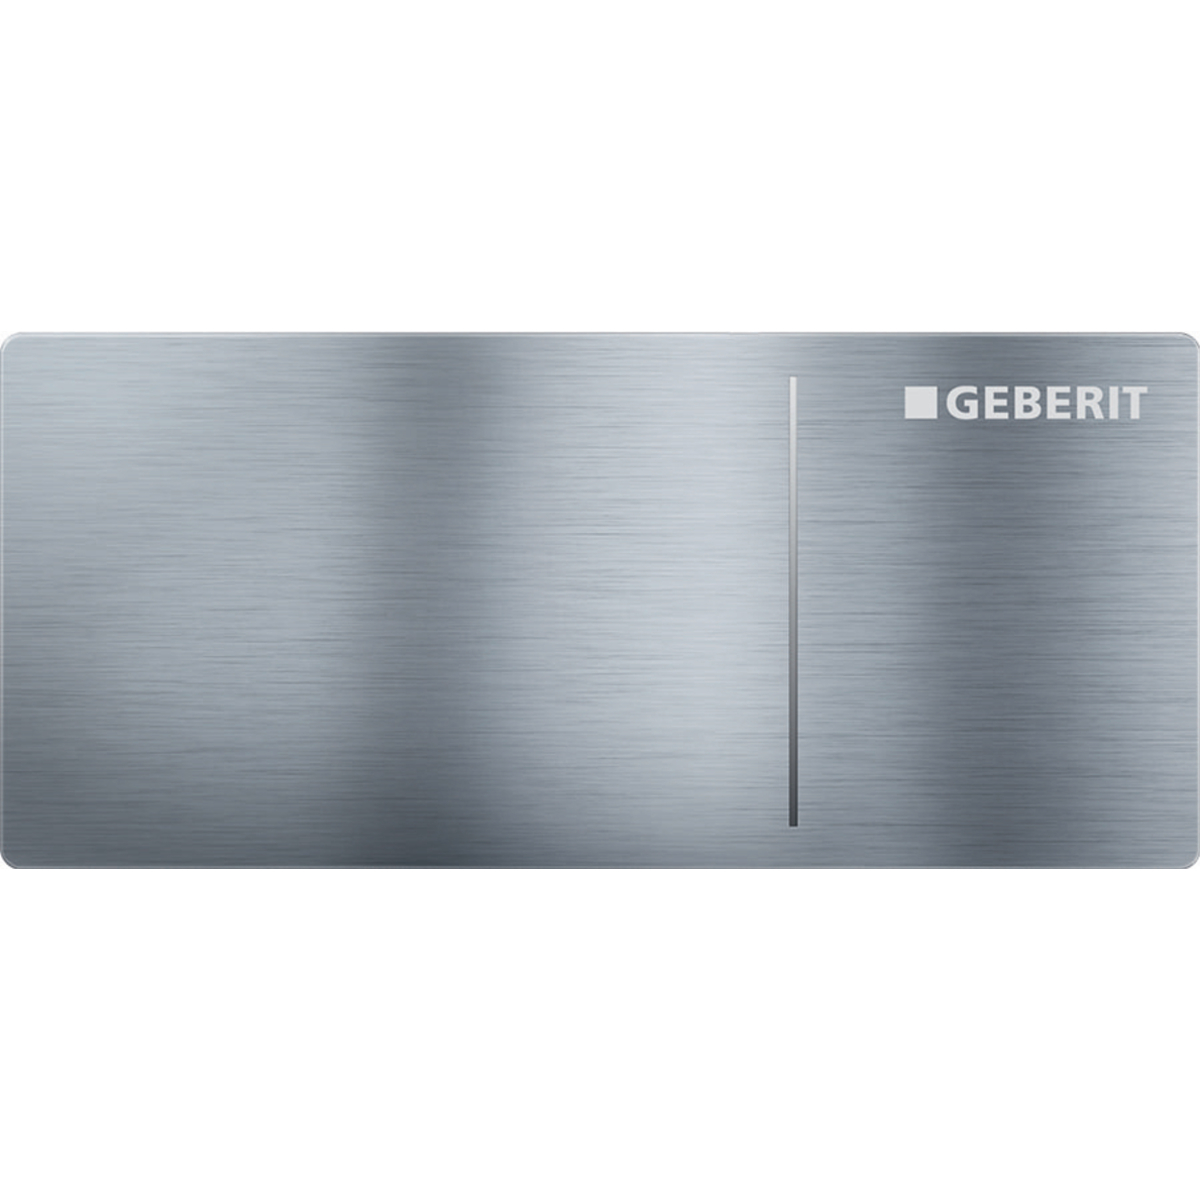 Geberit 115.635.FW.1 Remote Flush Actuation Type 70 for Dual Flush, for Sigma Concealed Cistern 8 Cm - Stainless Steel Brushed